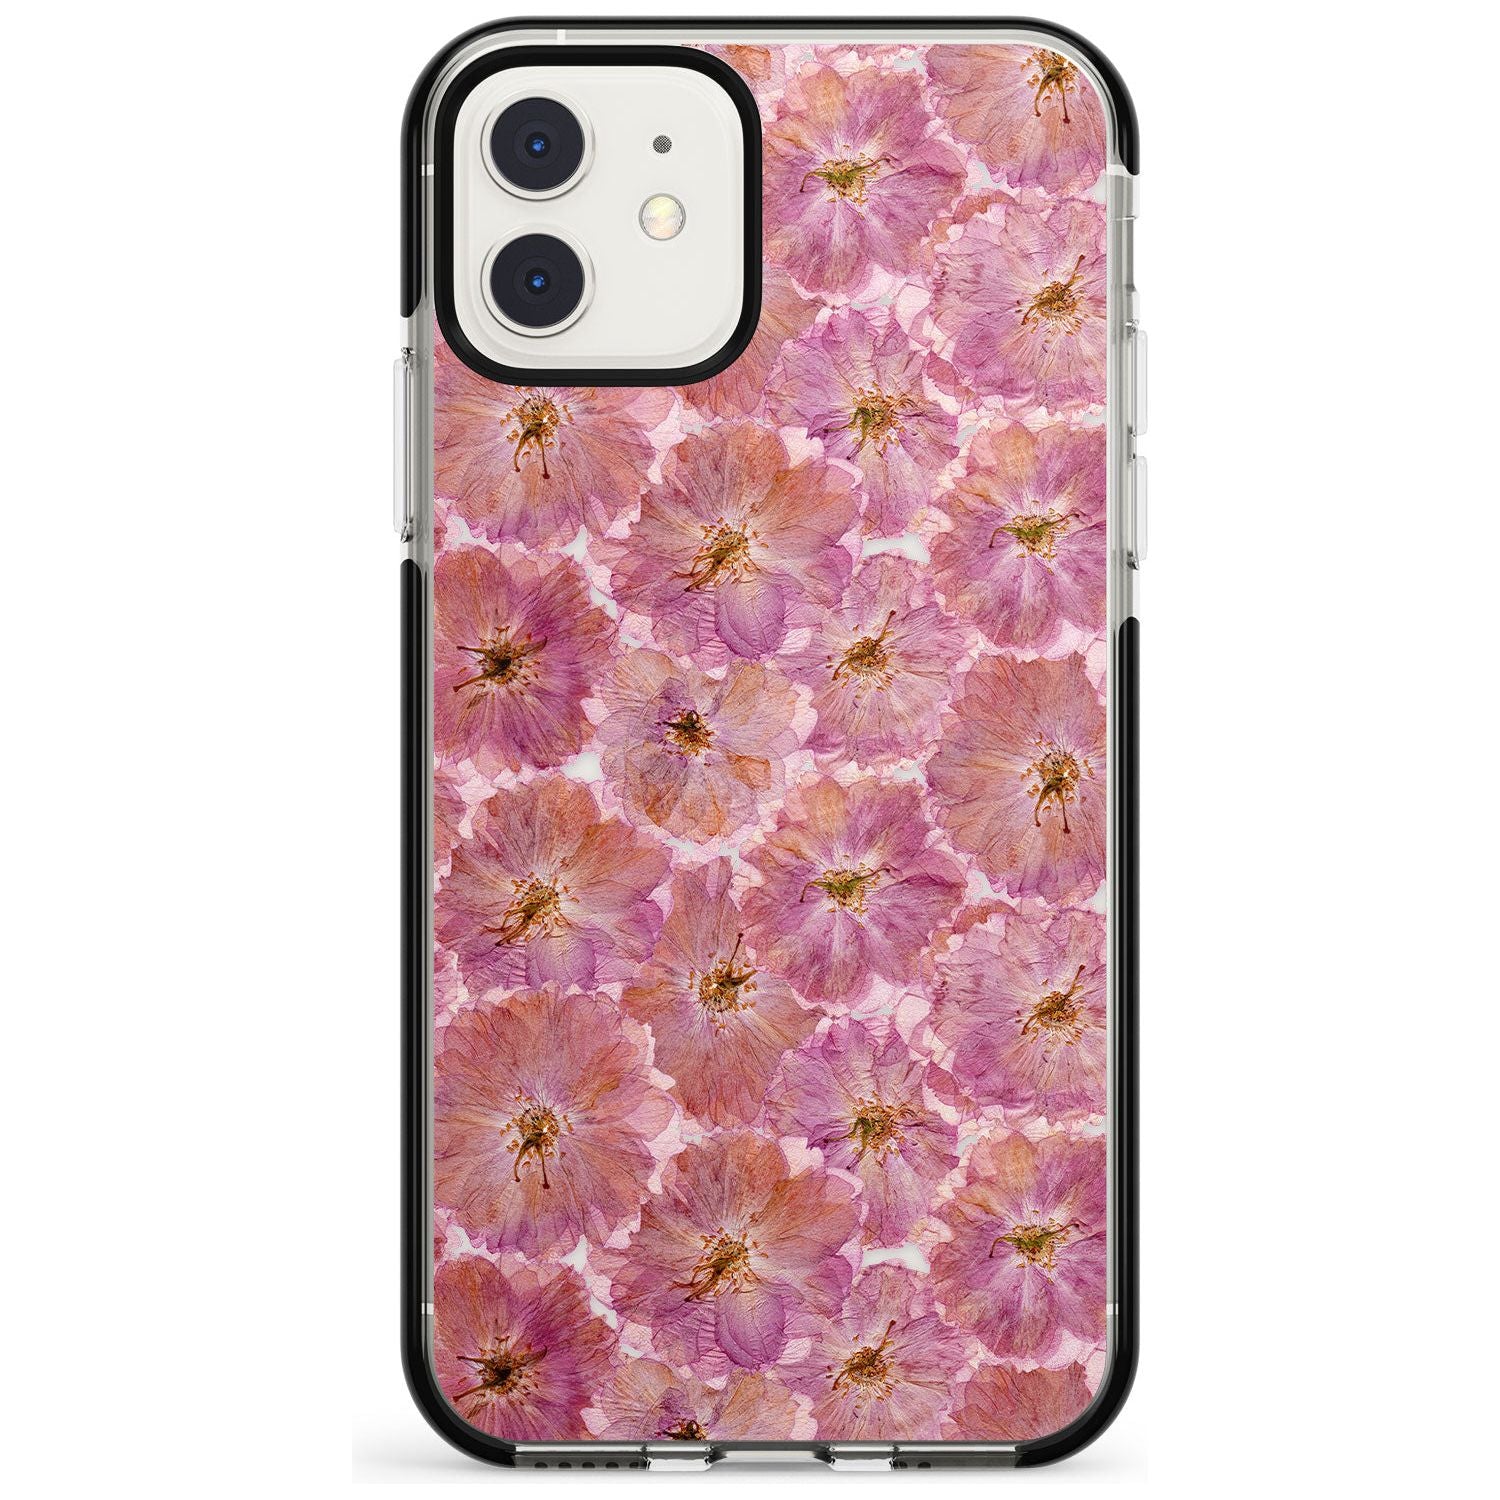 Large Pink Flowers Transparent Design Black Impact Phone Case for iPhone 11